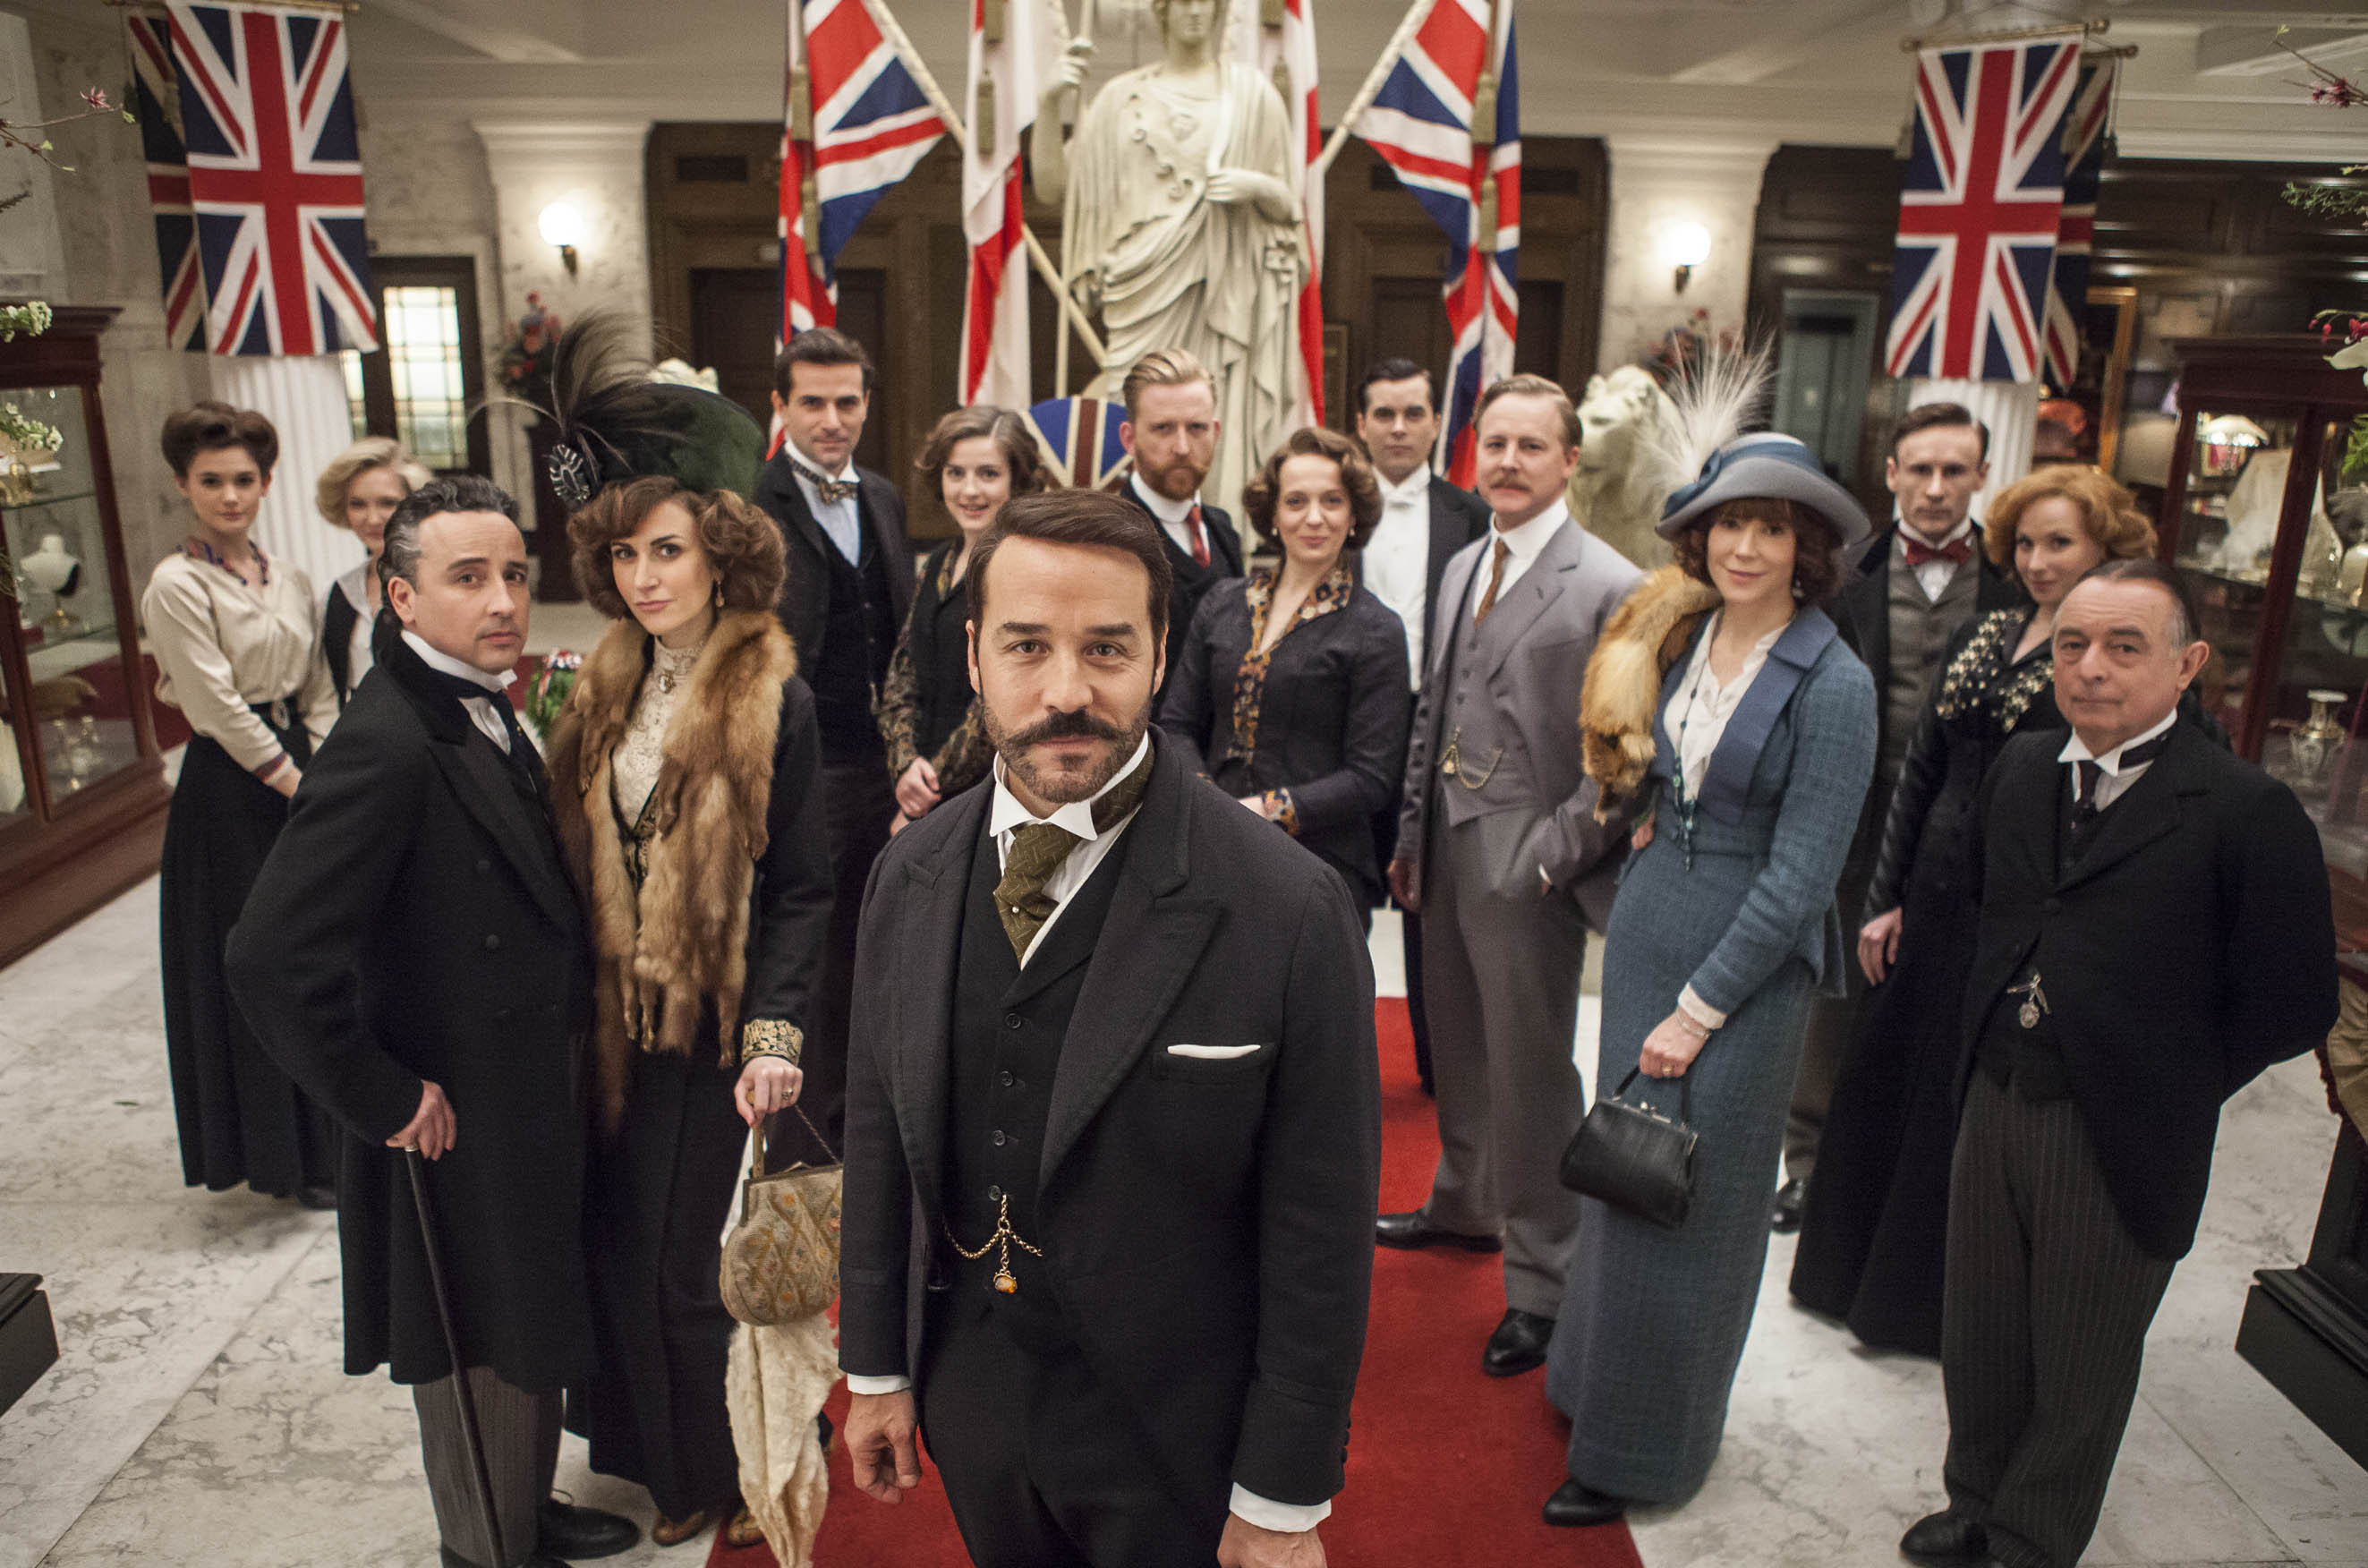 The "Mr. Selfridge" crew gets their national pride on. (Photo: ITV for MASTERPIECE)